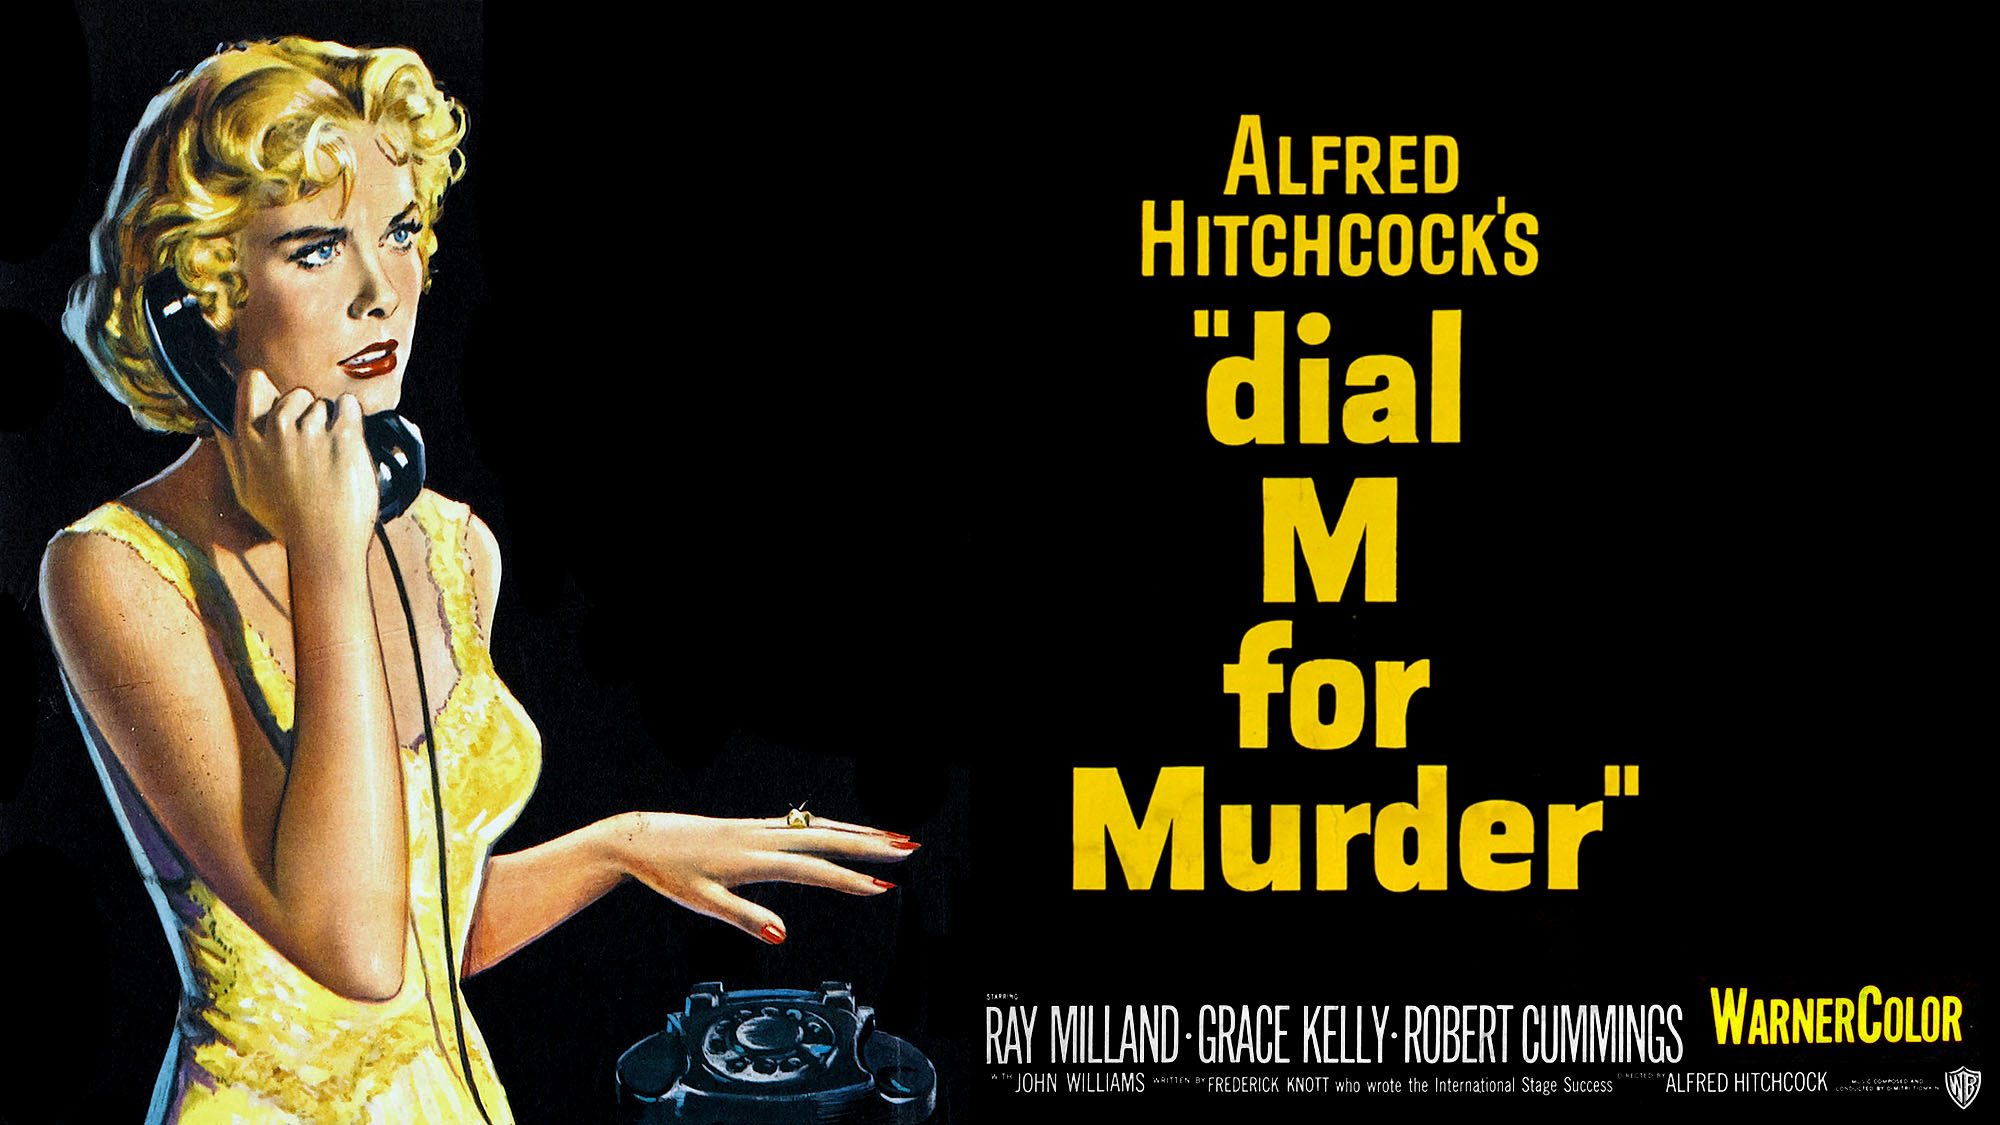 [Dial M for Murder]